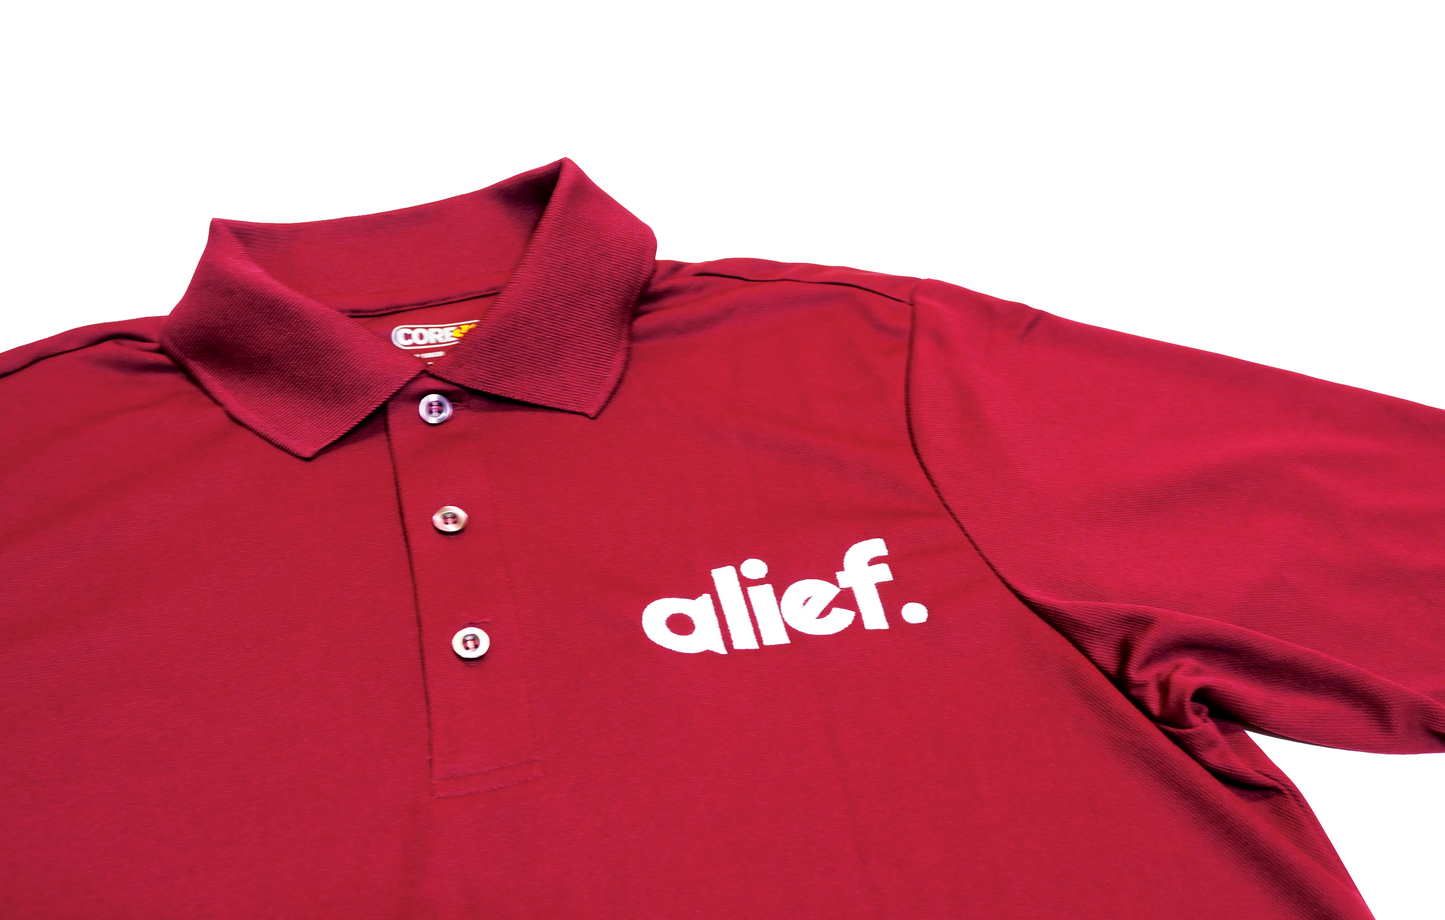 Embroidered Bold Alief Collar T-Shirts - Maroon/ White